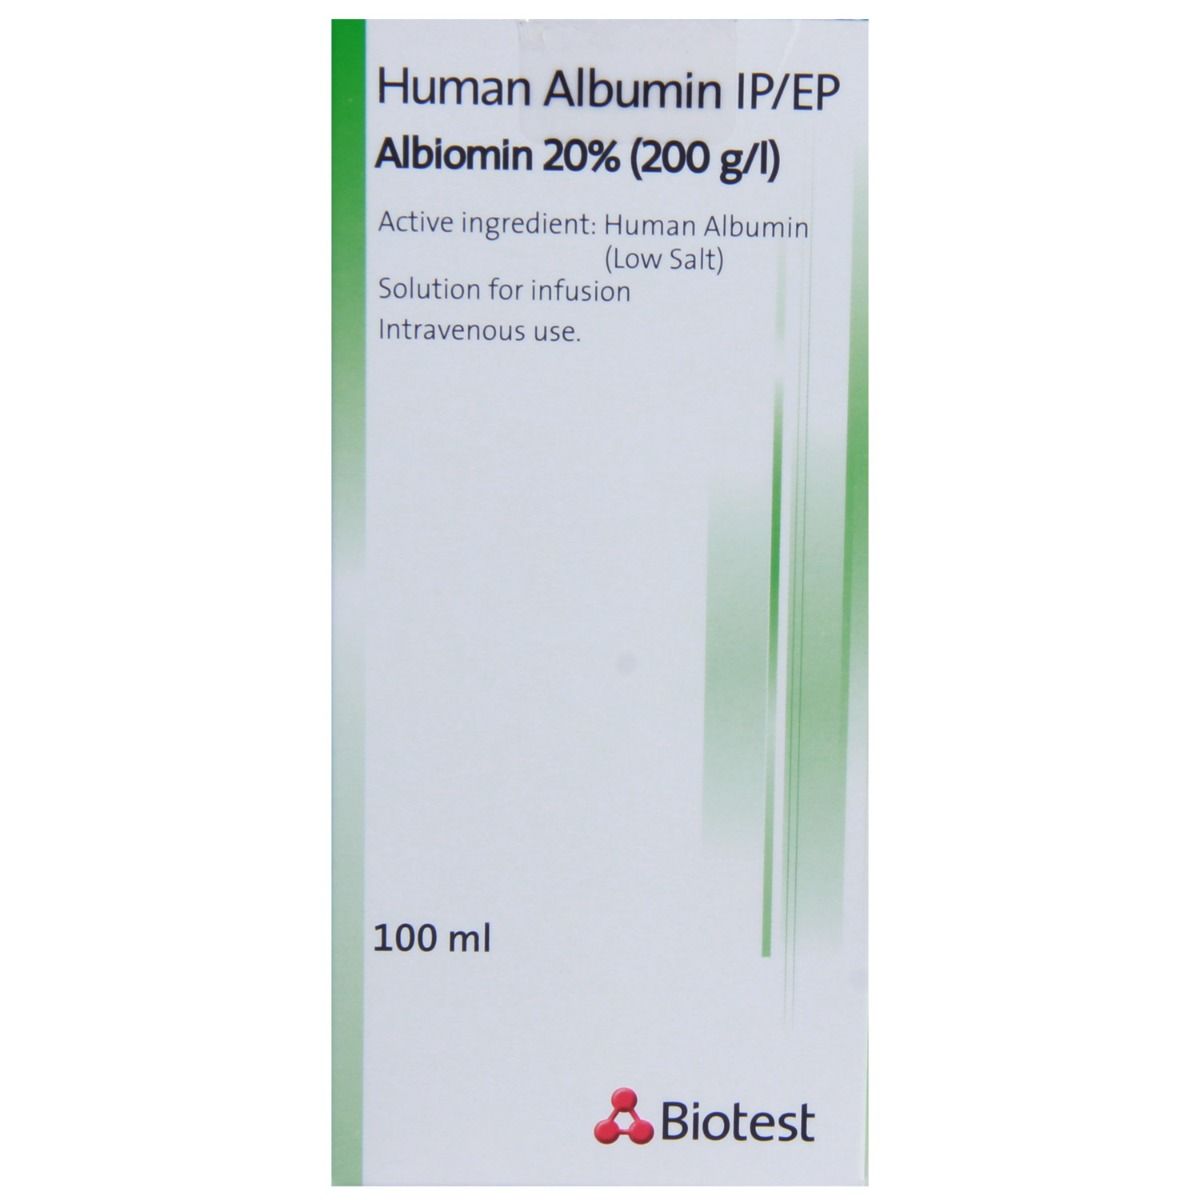 Albiomin 20% Infusion 100 ml, Pack of 1 INJECTION